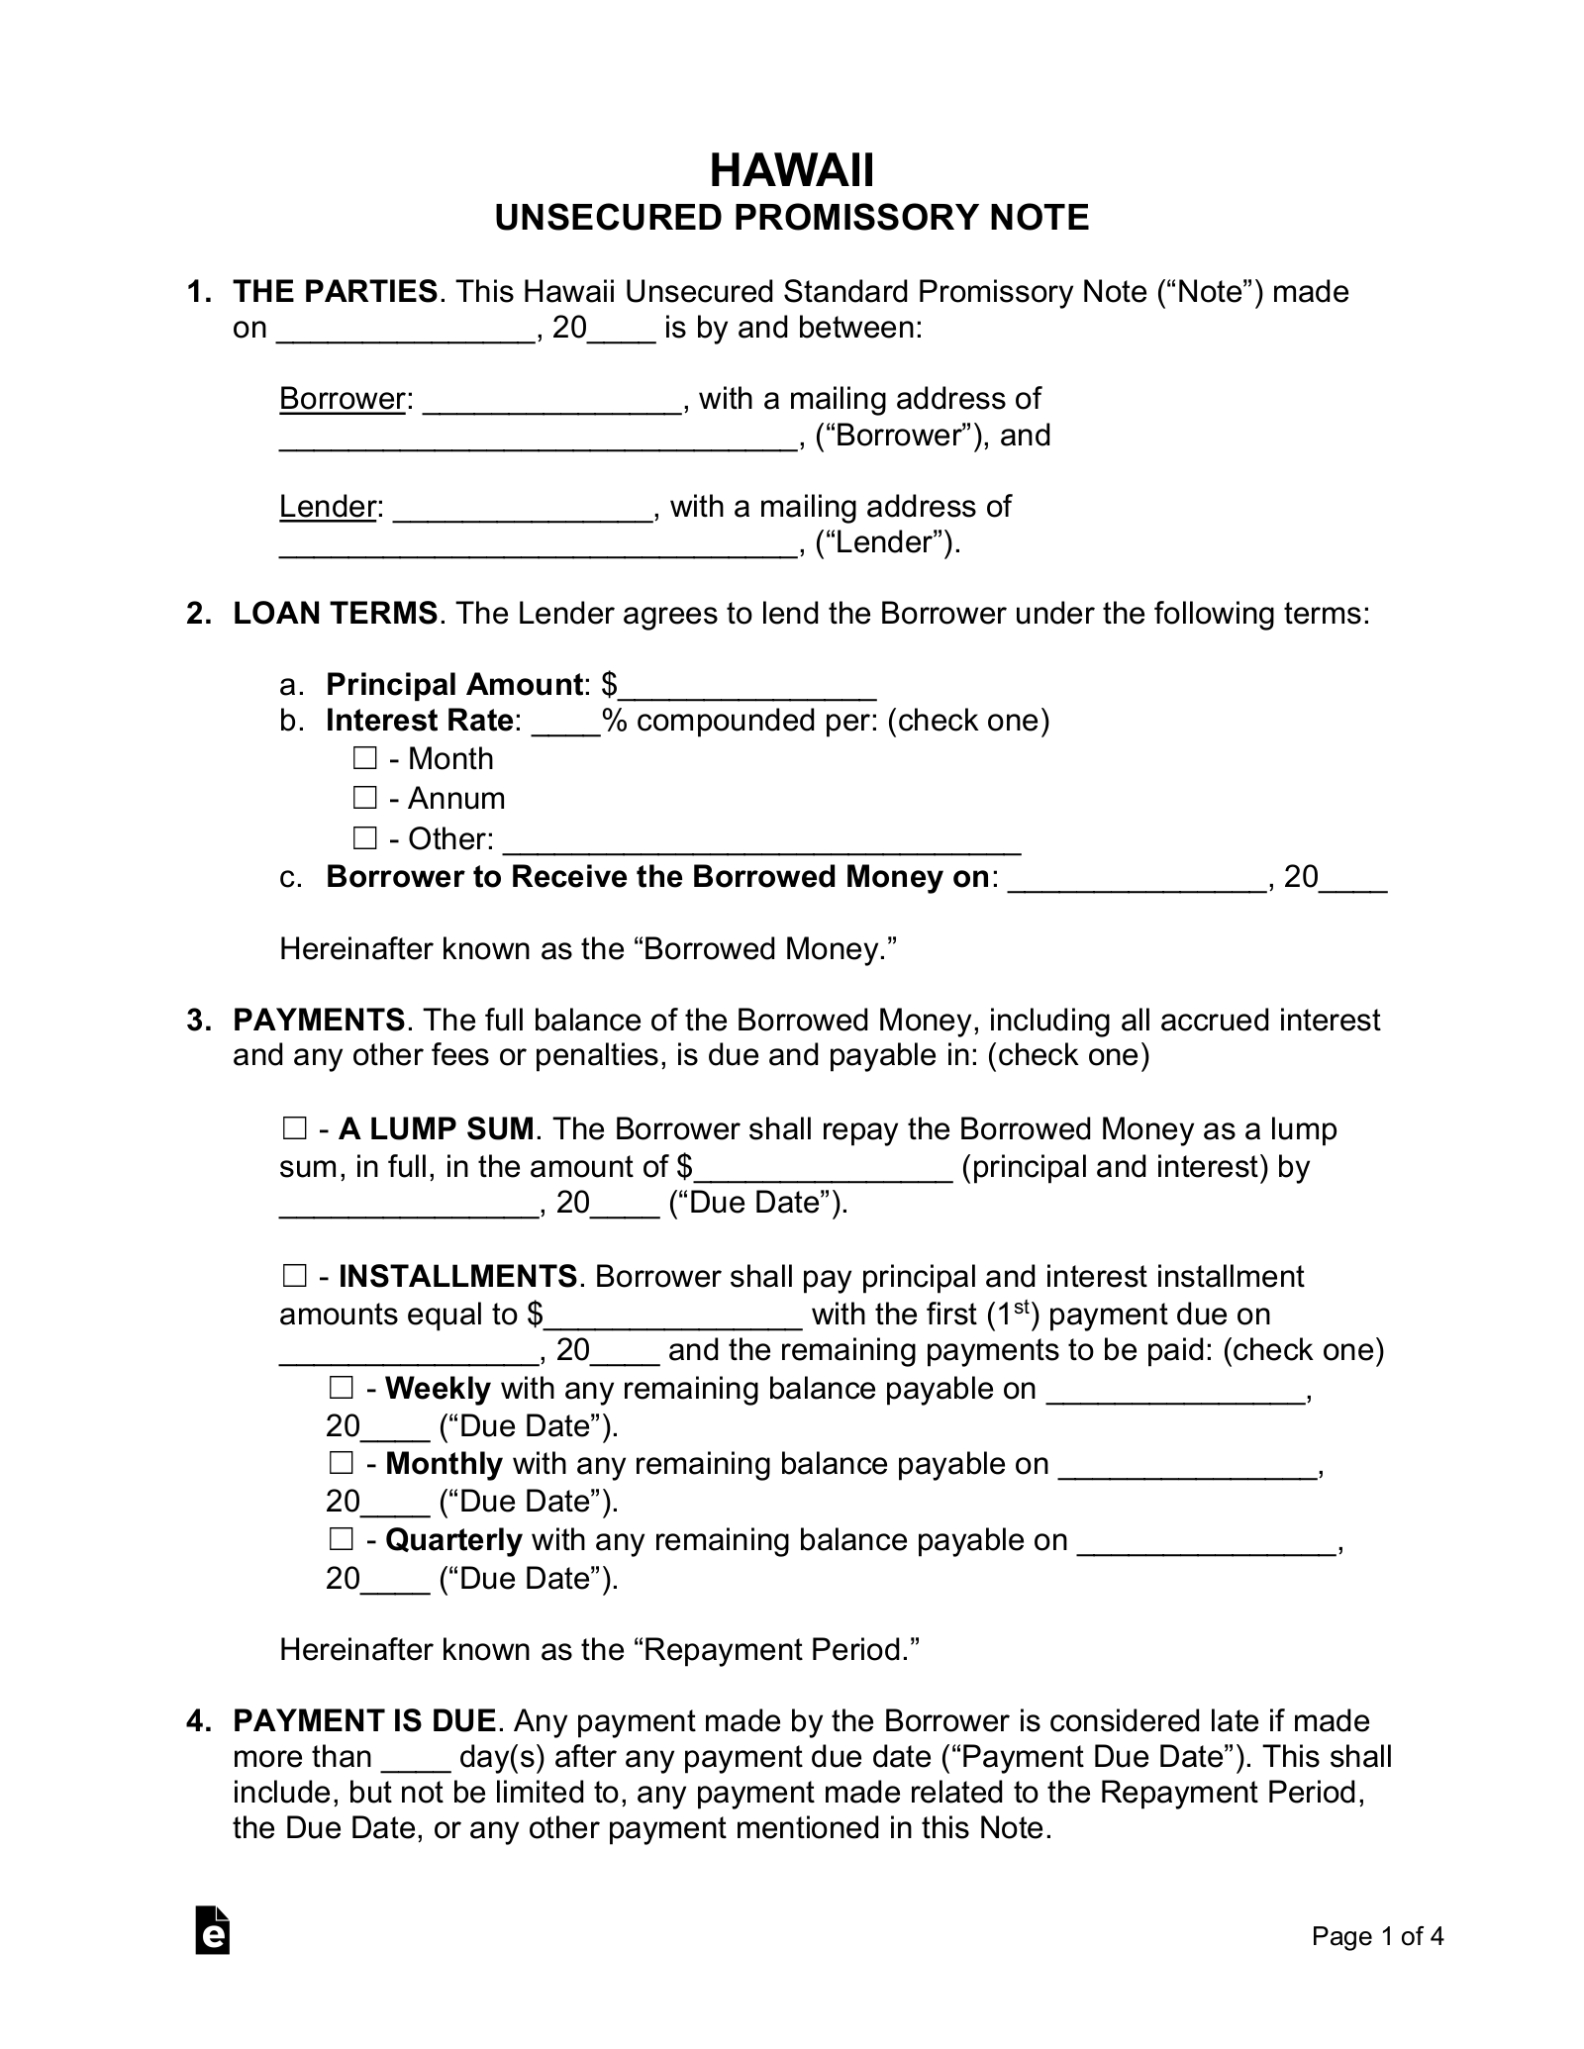 Free Hawaii Unsecured Promissory Note Template - Word | Pdf - Eforms within Promissory Notes Templates